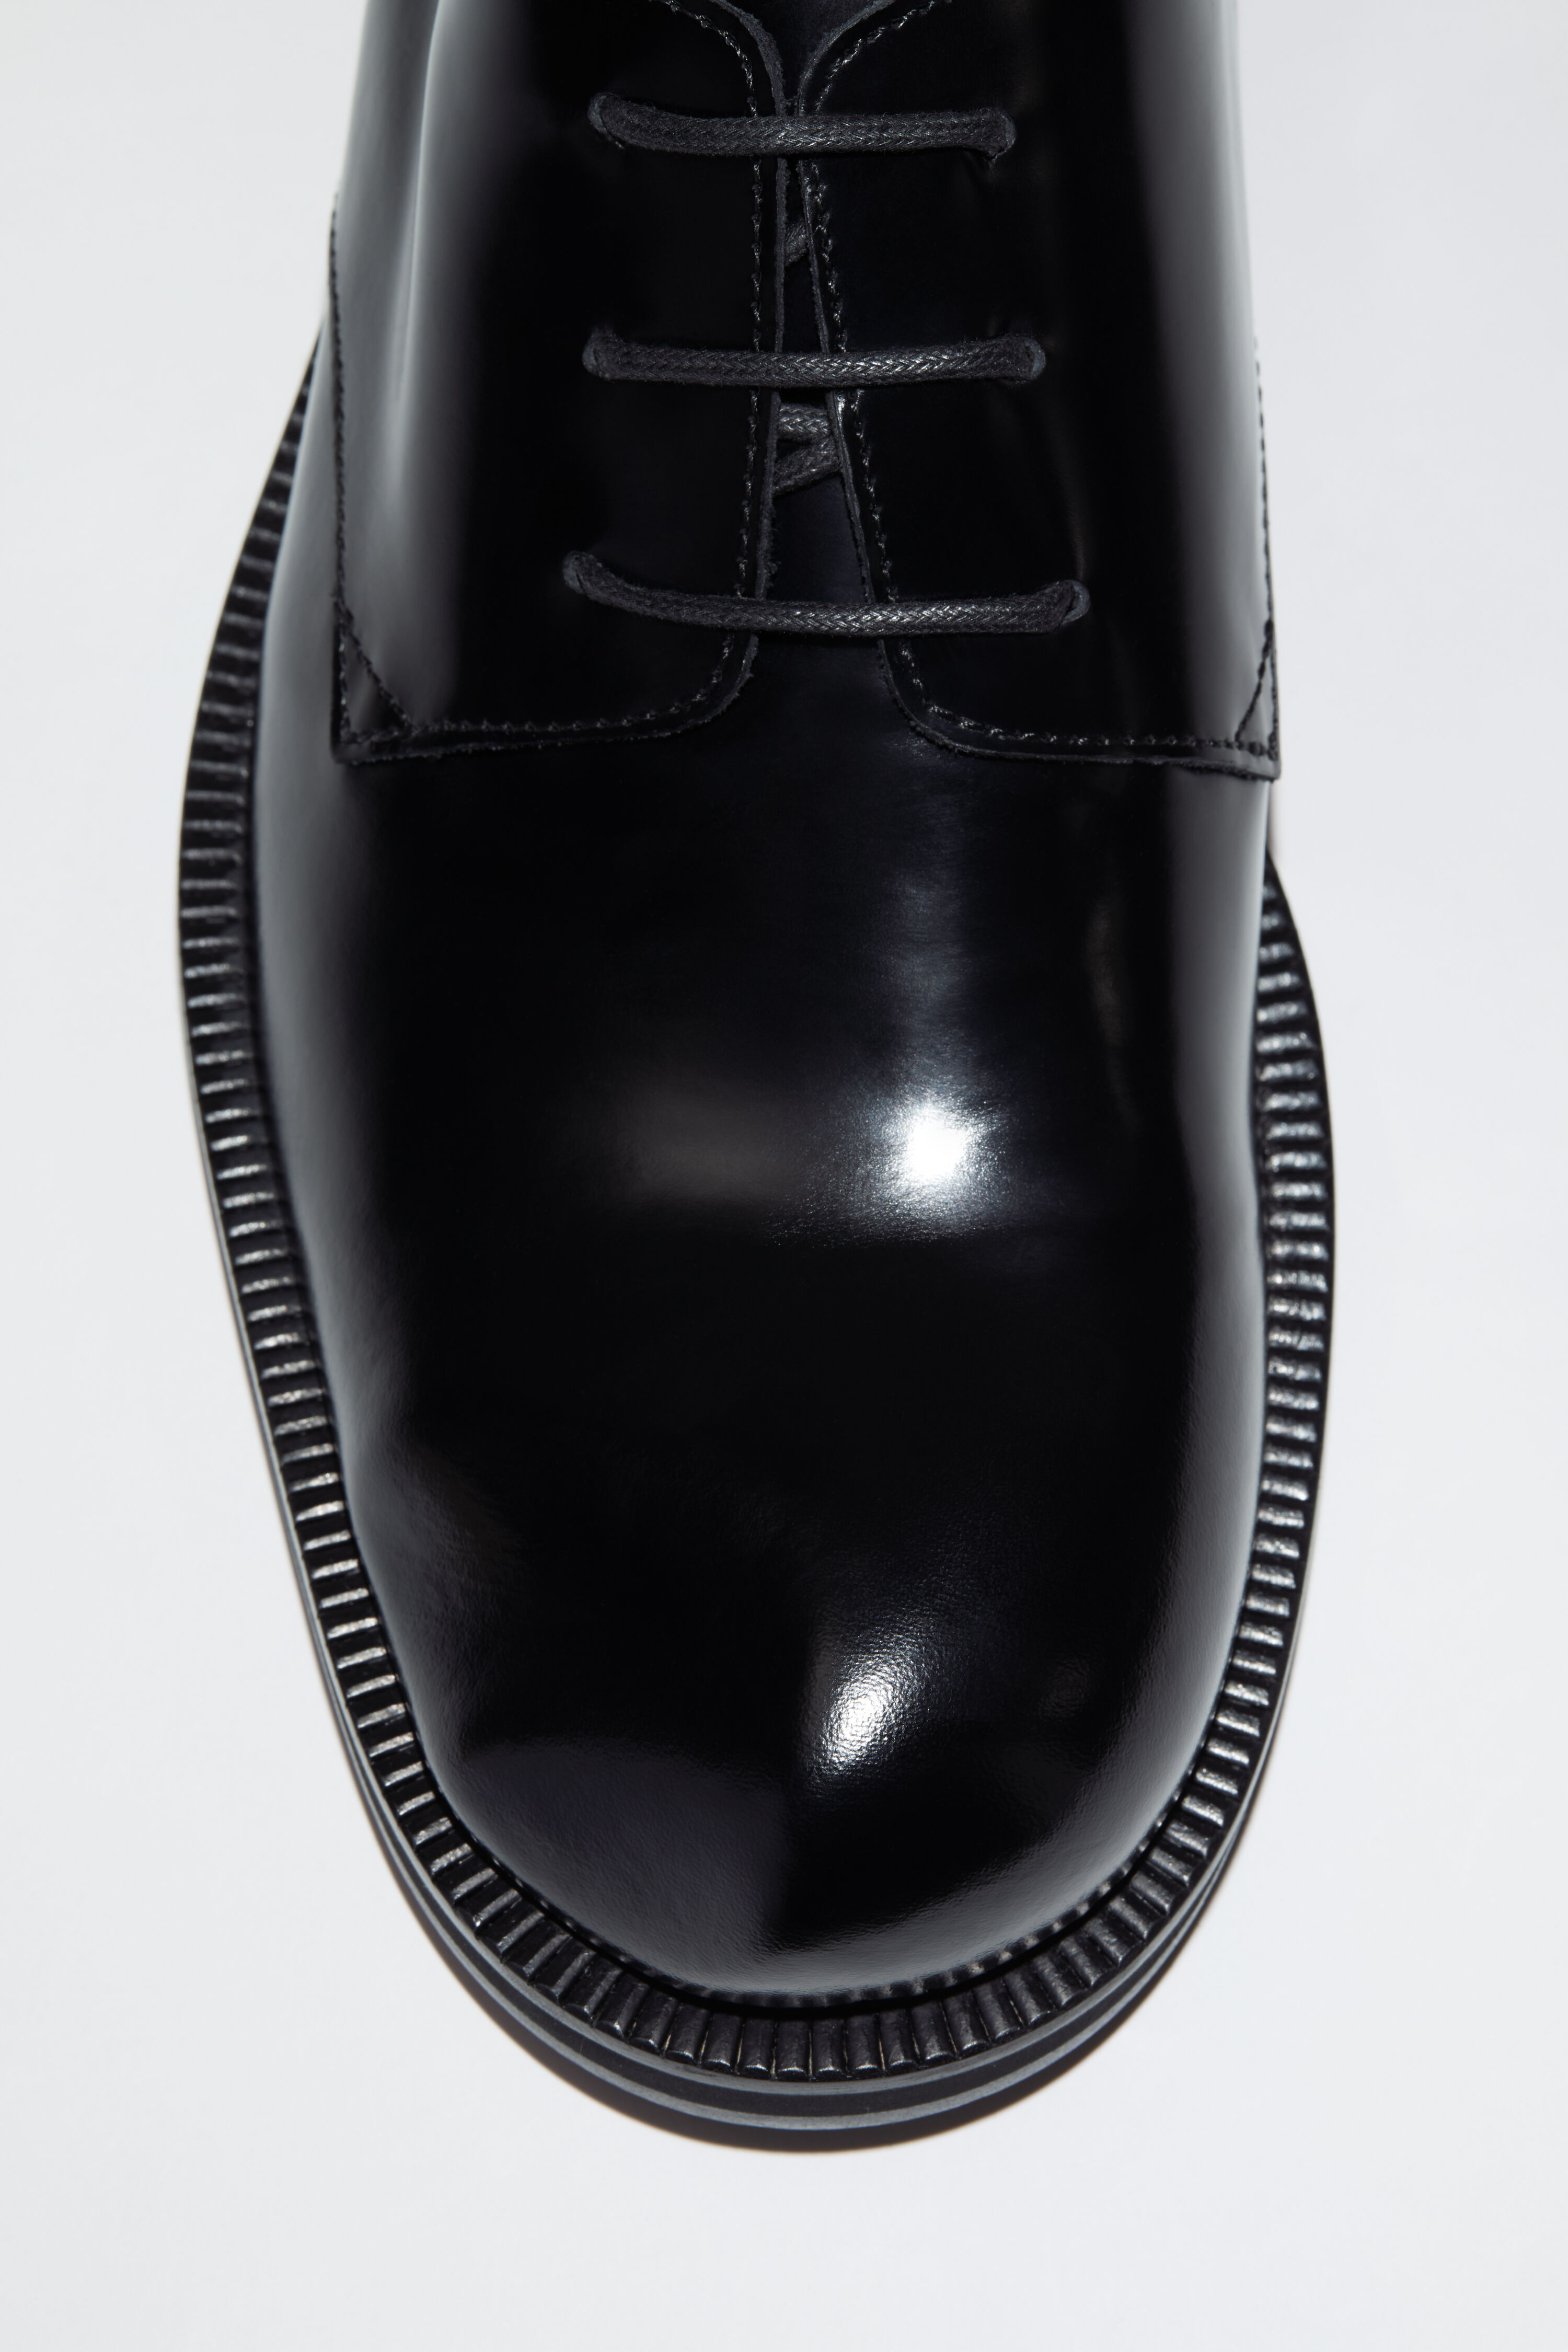 ACNE STUDIOS LEATHER DERBY SHOES 42